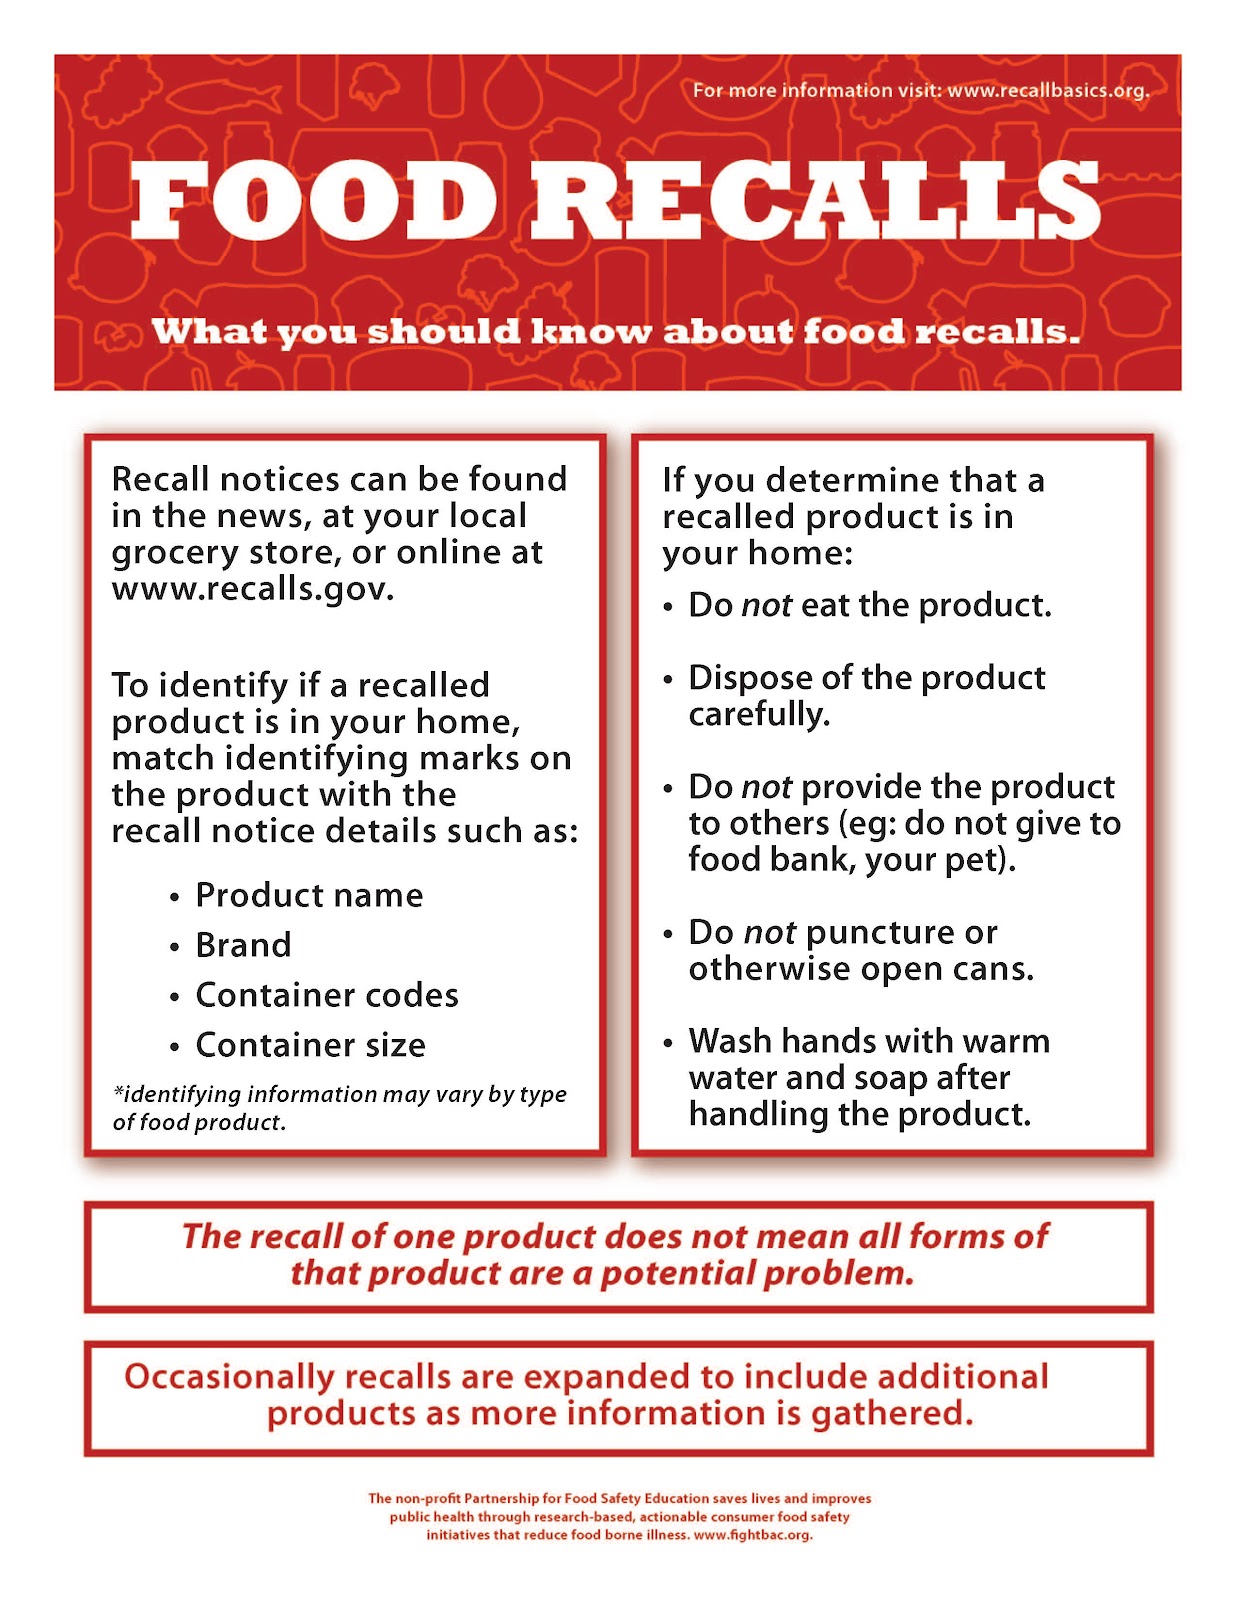 Family of Farmers Food Recall Basics What You Should Know